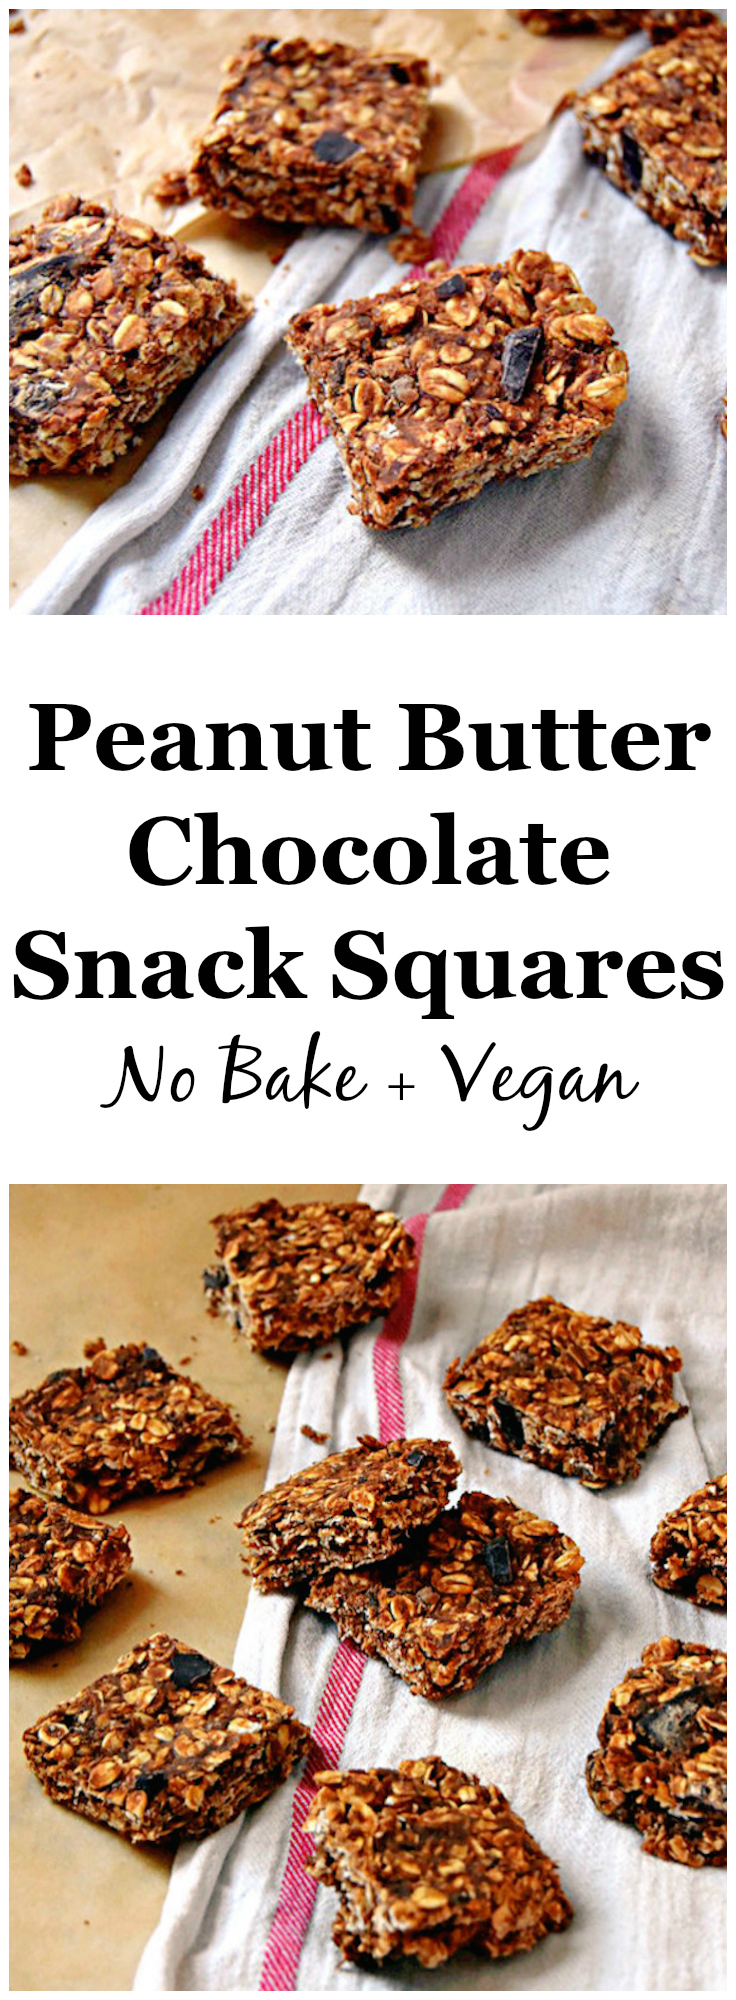 Peanut Butter Chocolate Snack Squares | uprootkitchen.com